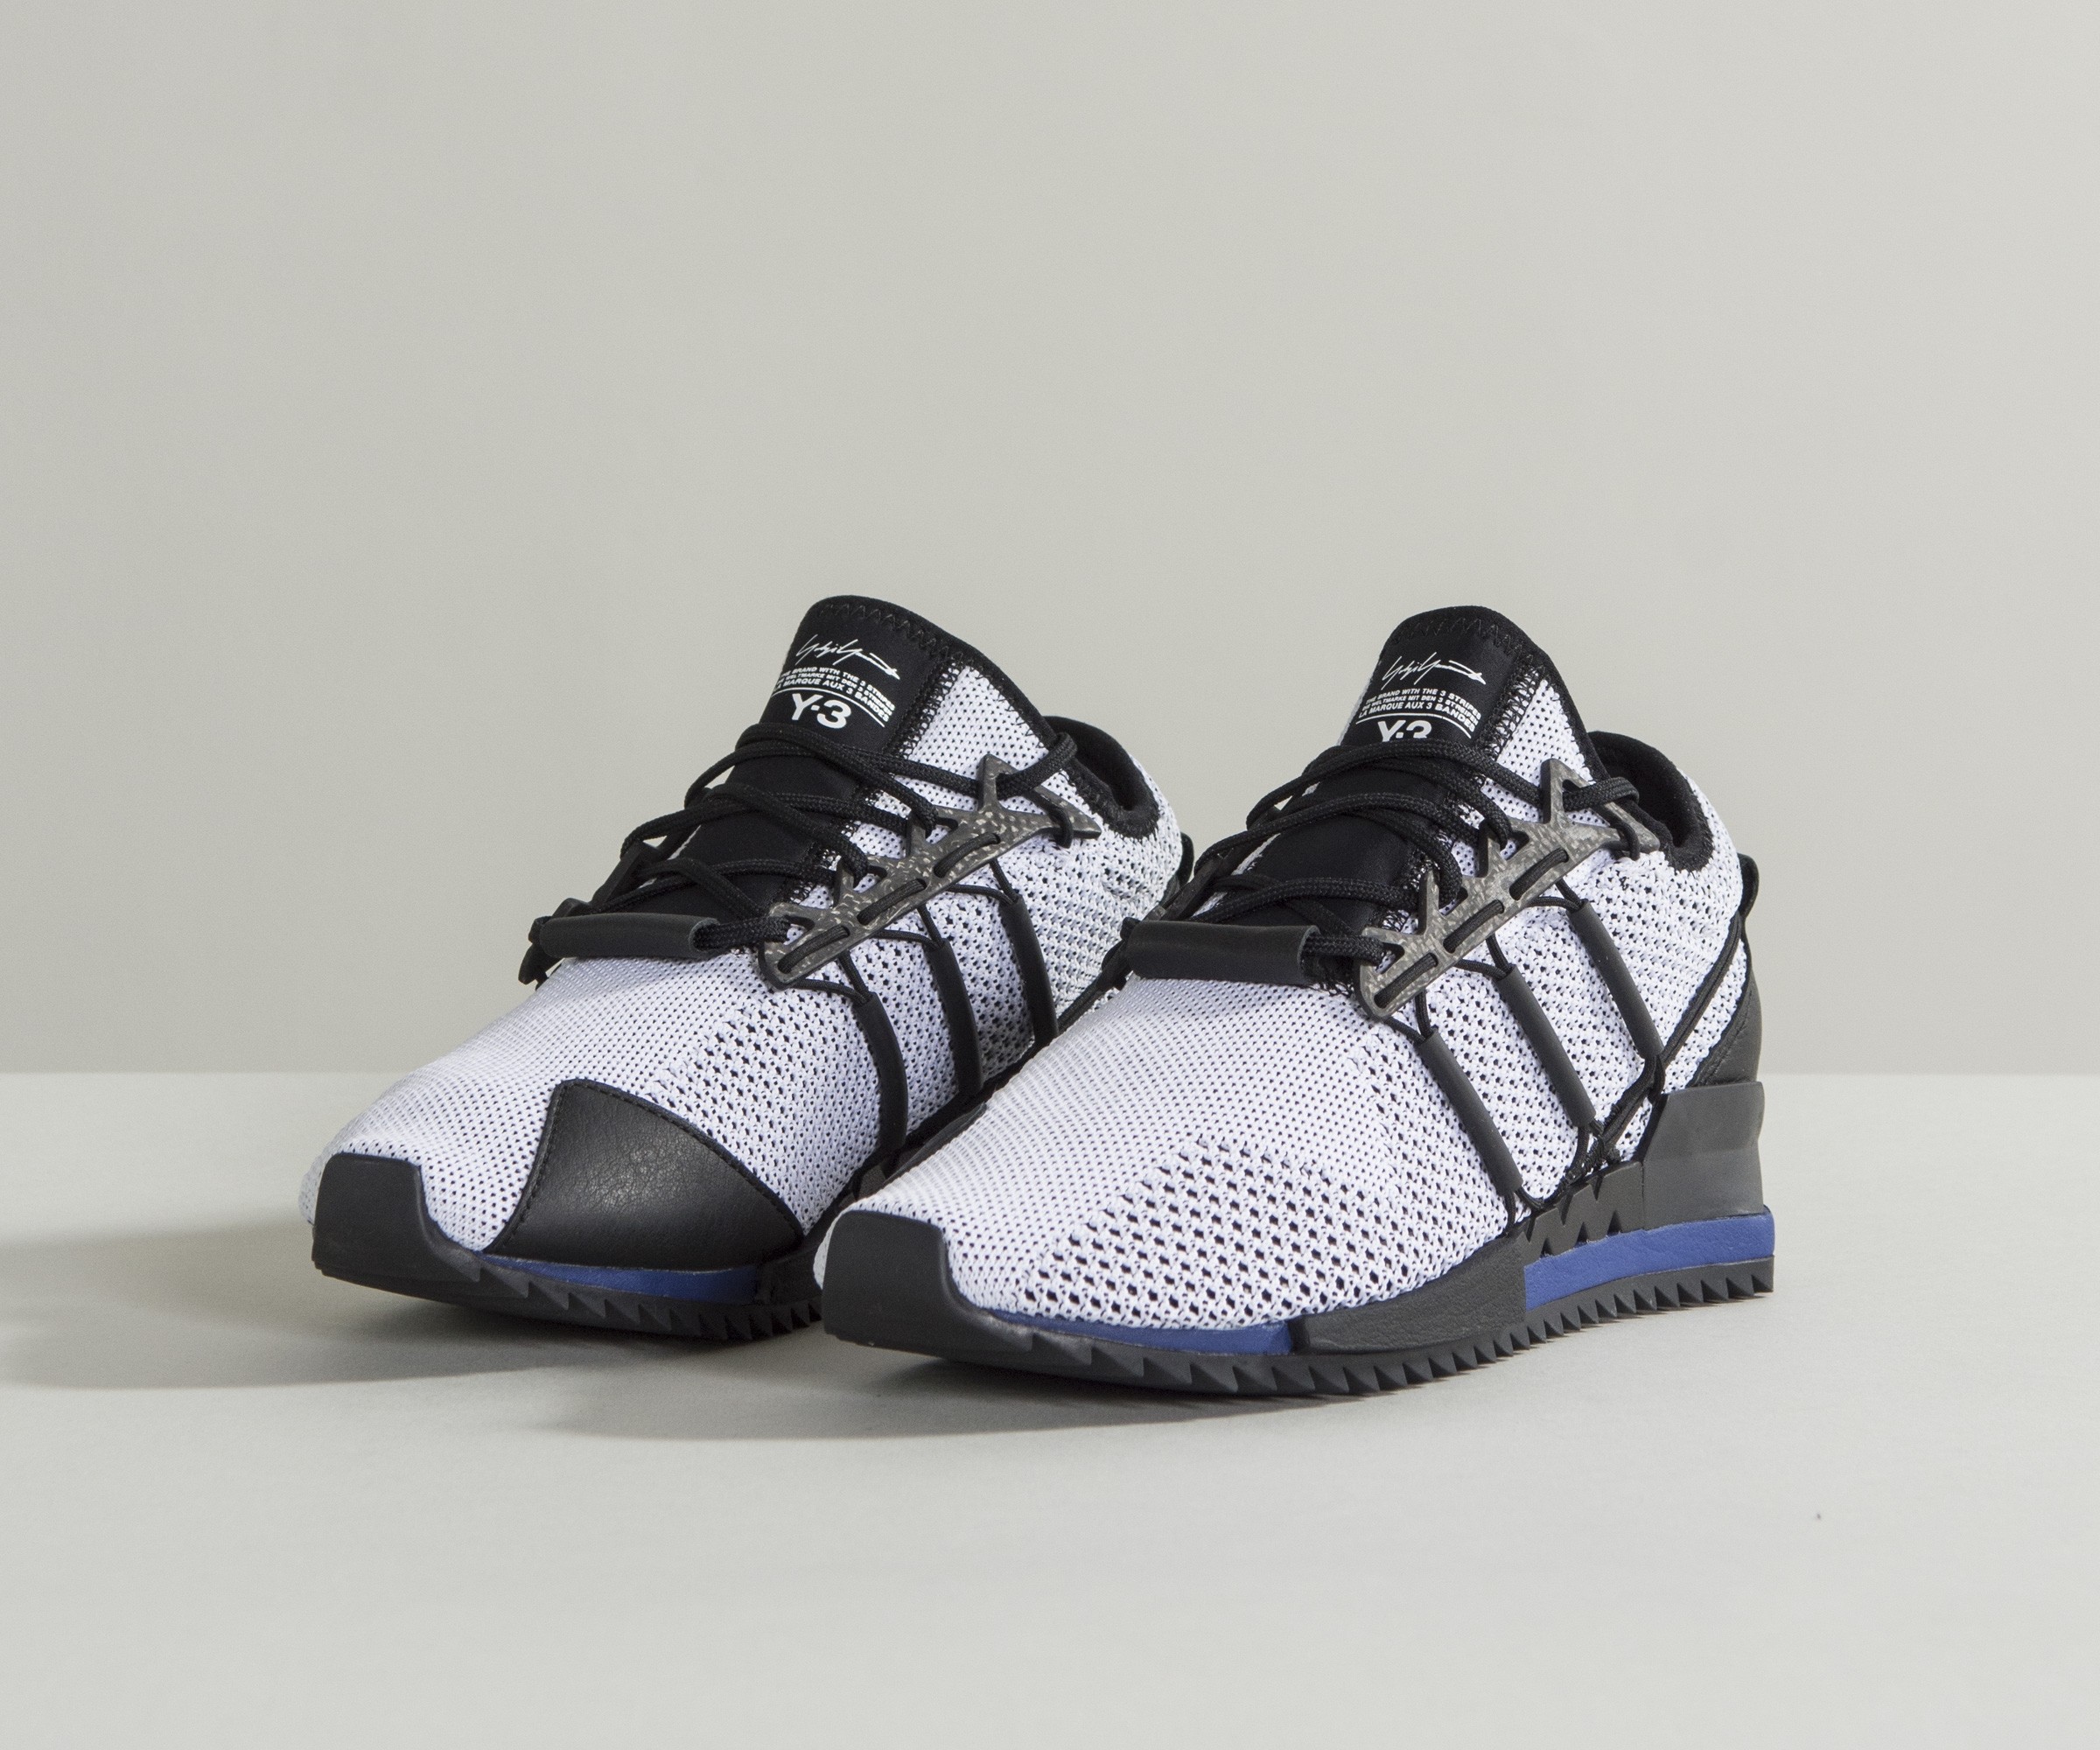 Y-3 'Harigane' Prime Knit Trainers White/Black/Blue